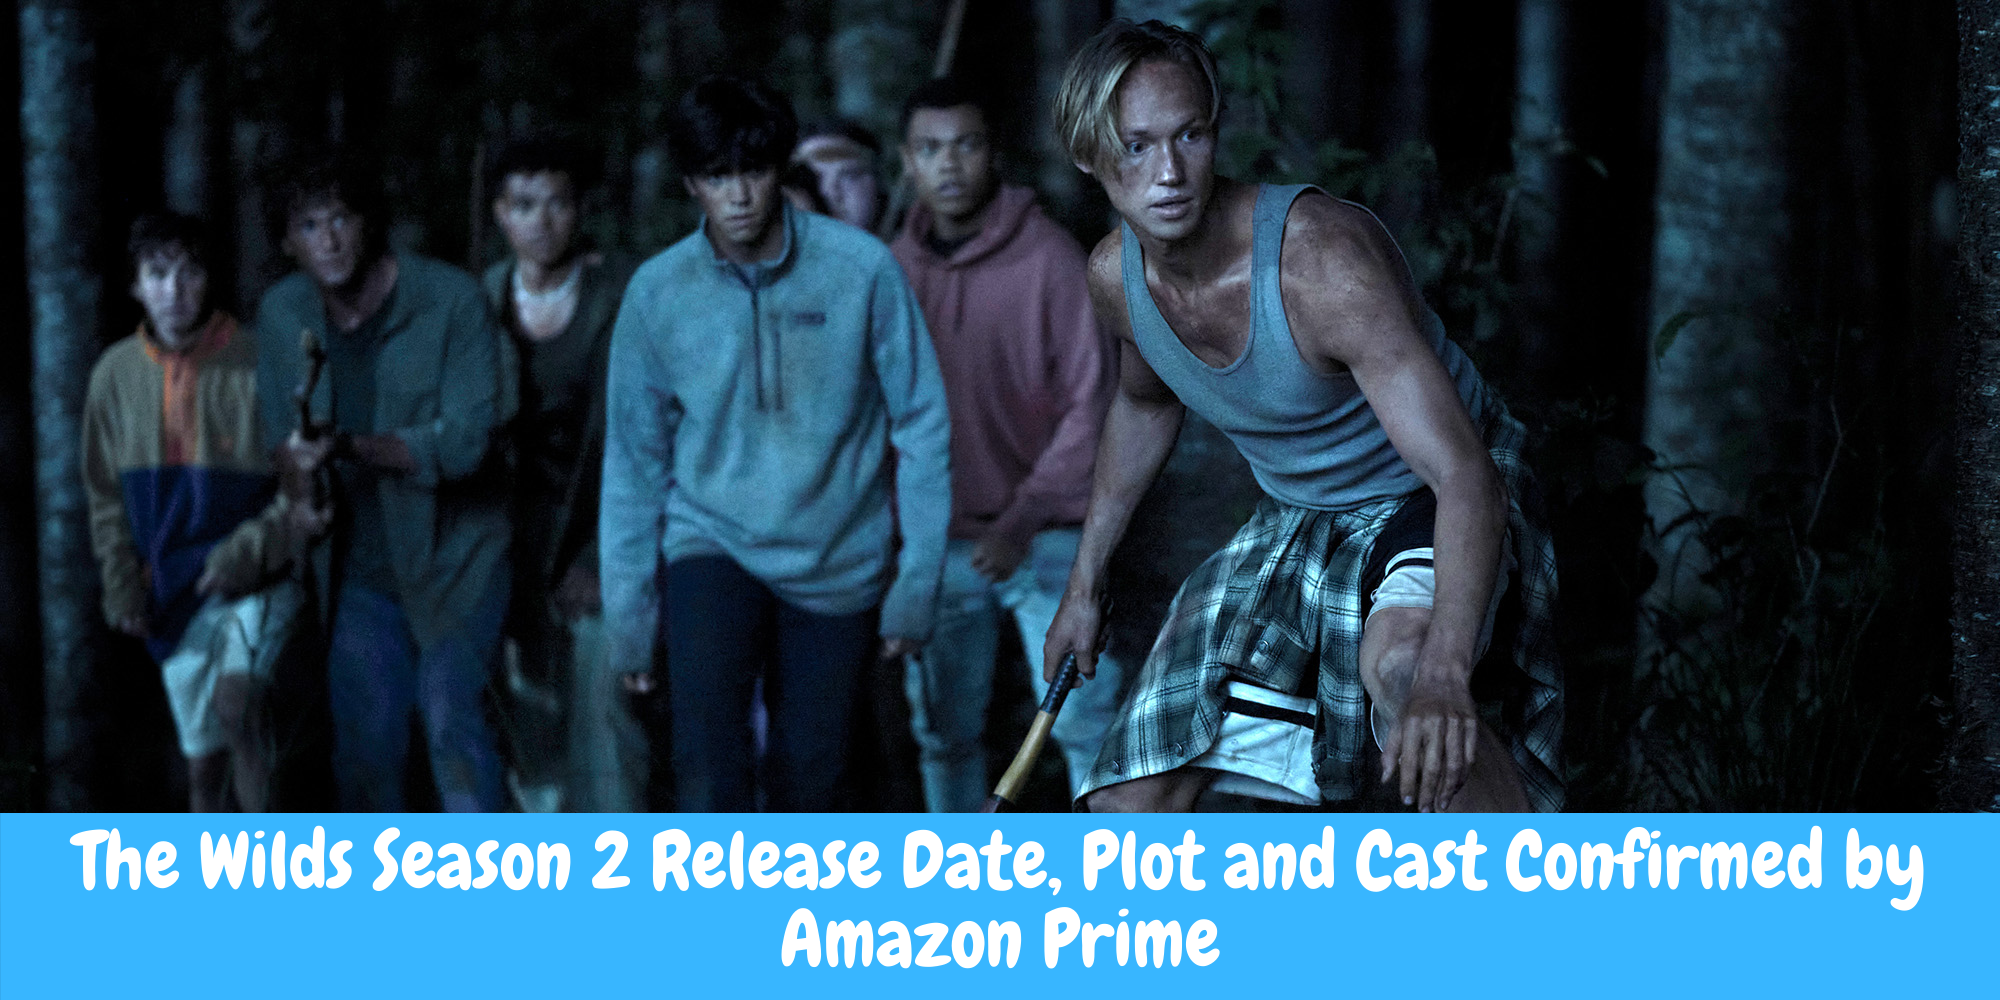 The Wilds Season 2 Release Date, Plot and Cast Confirmed by Amazon Prime